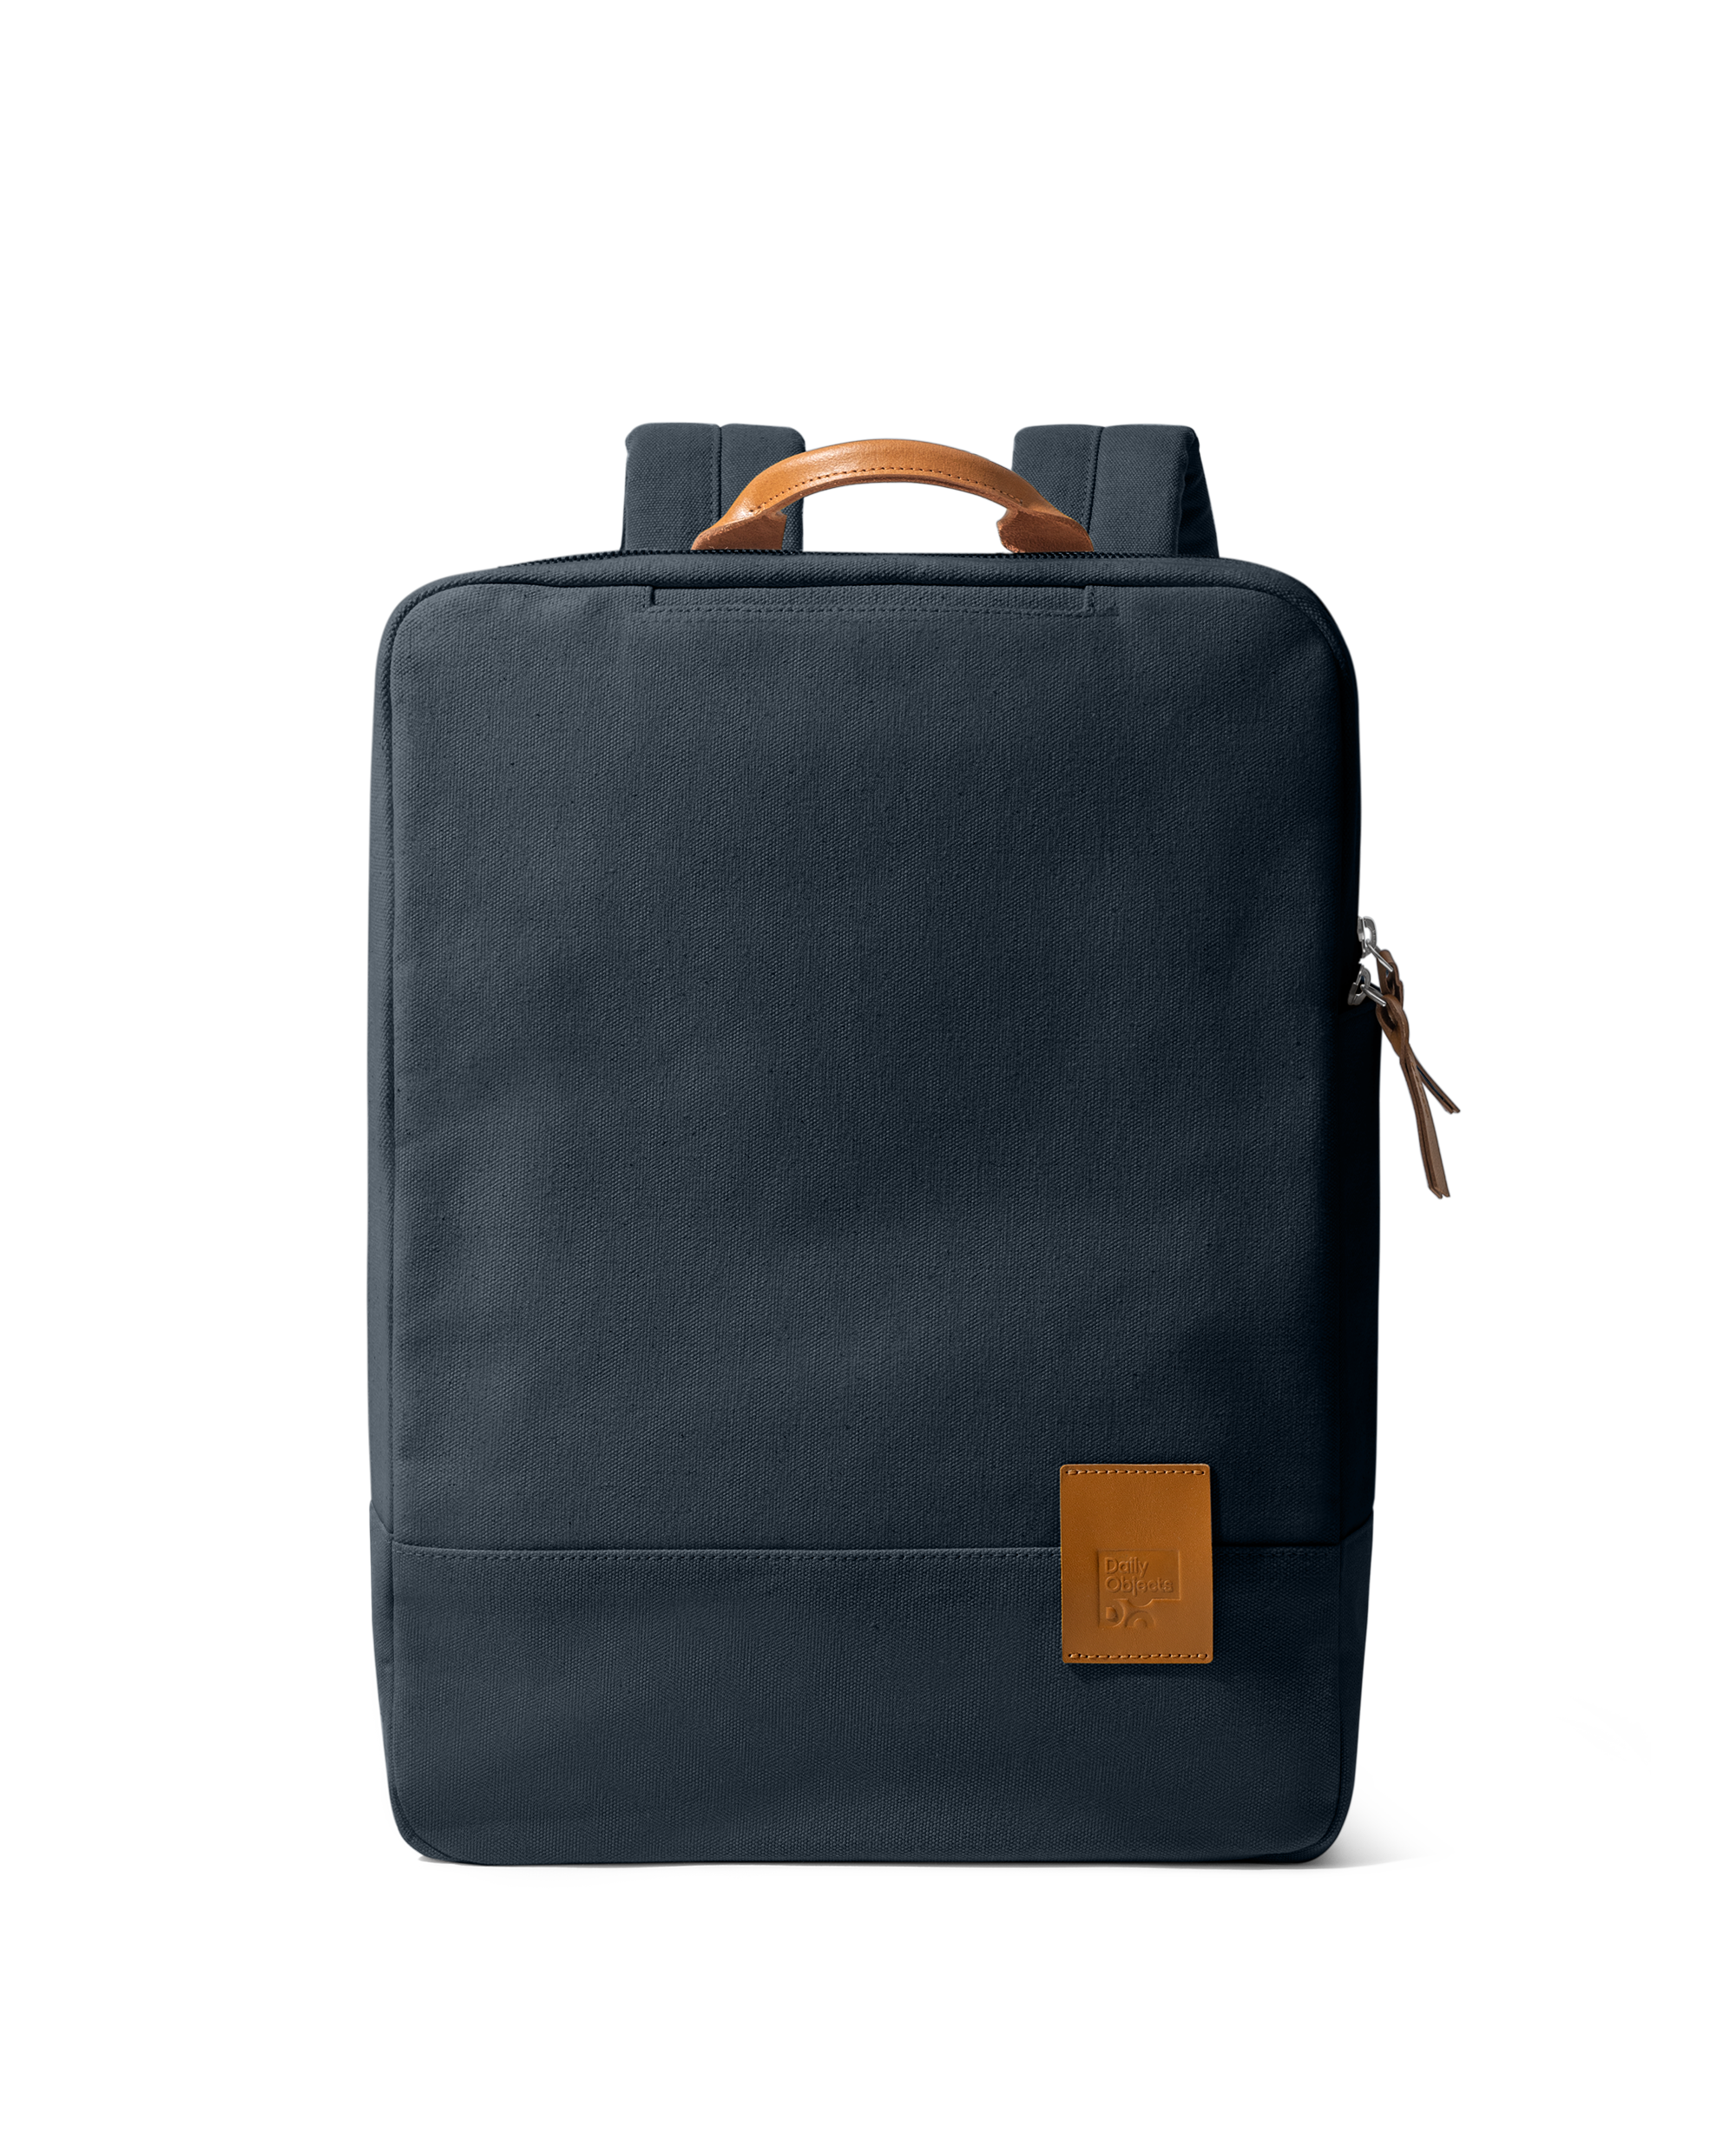 All Navy 9 to 9 Backpack